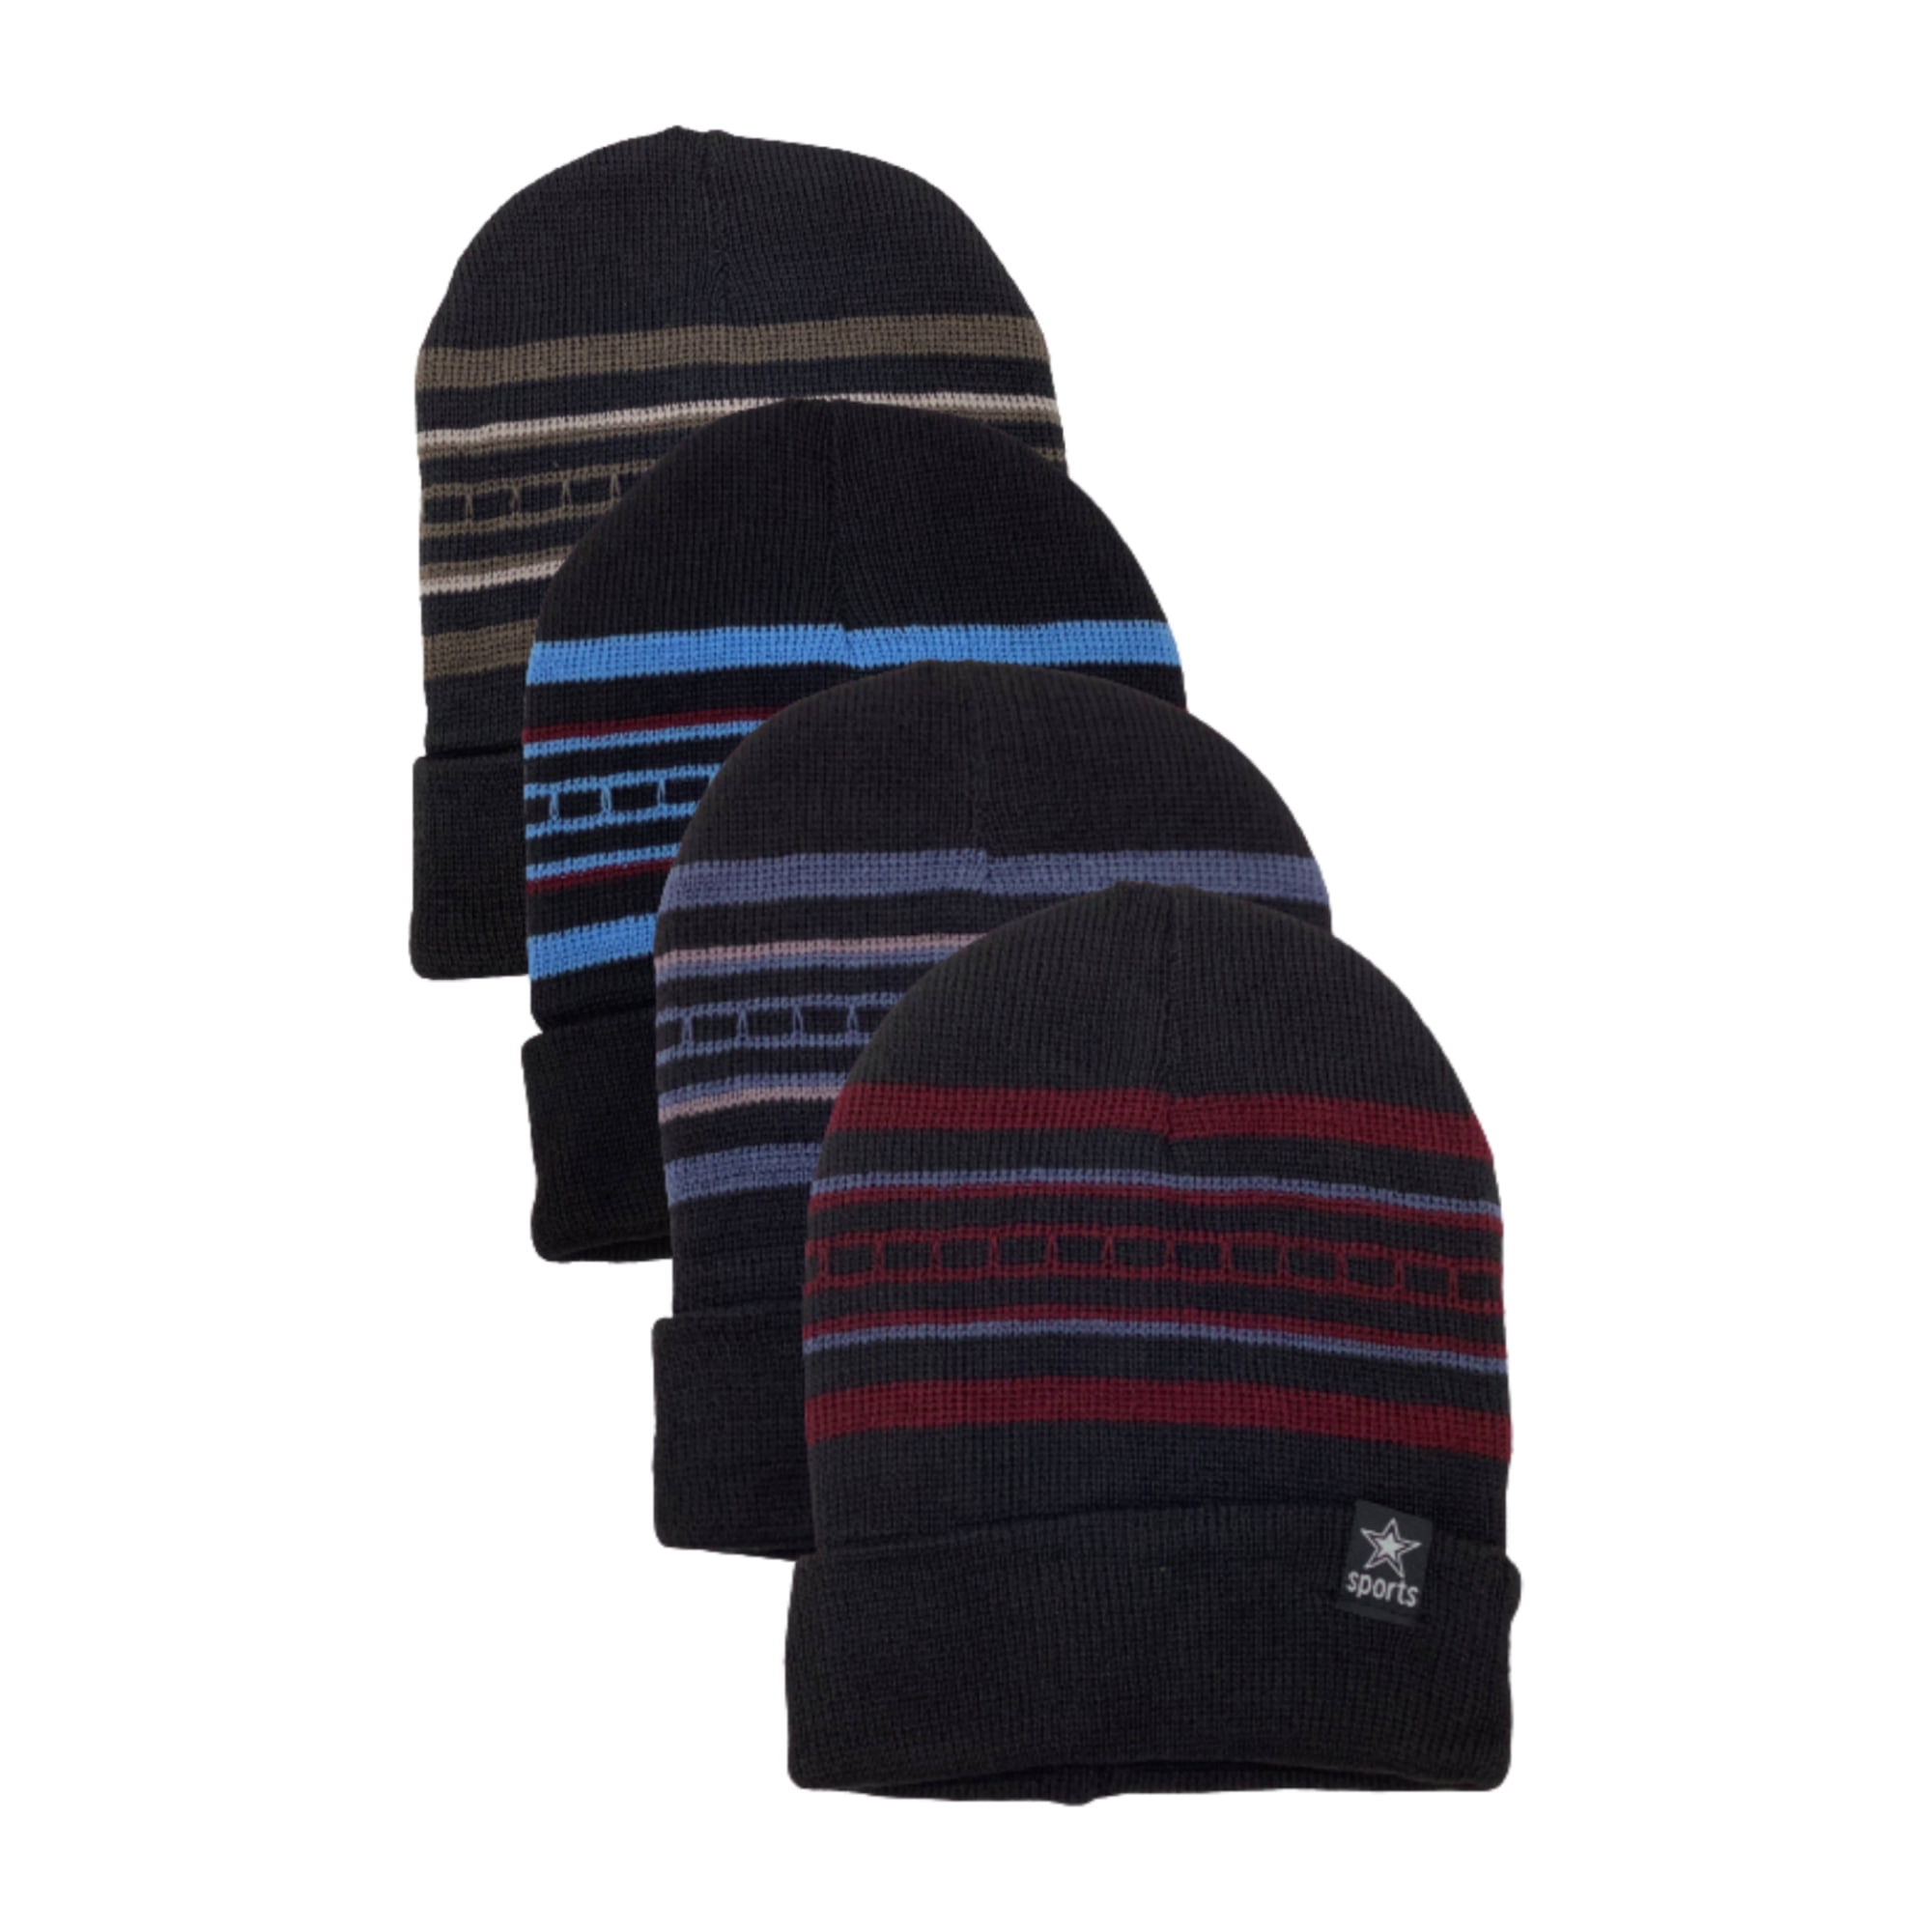 4 Pack Men's Thermal Fleece Lined Winter Insulated Cuff Beanie Hat (Black)  